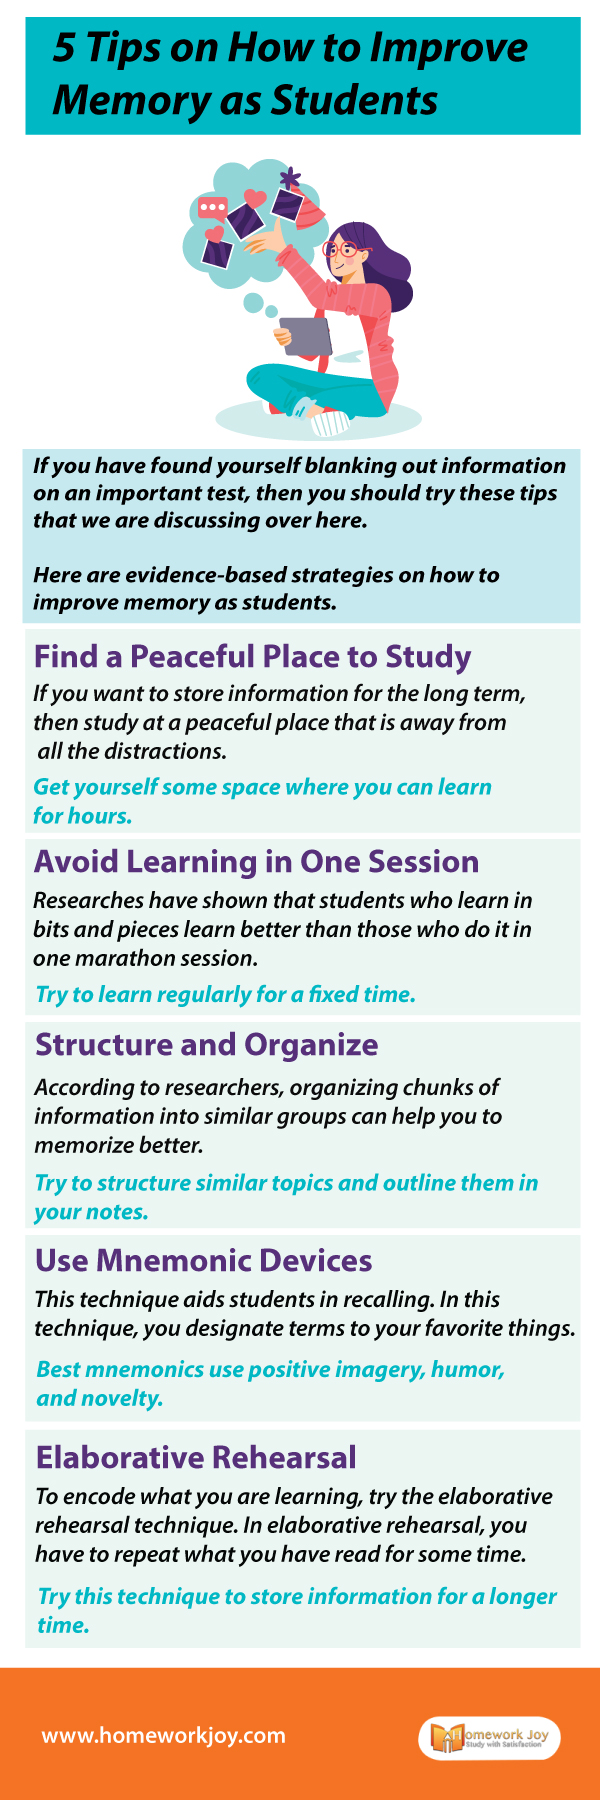 5-Tips-on-How-to-Improve-Memory-as-Students